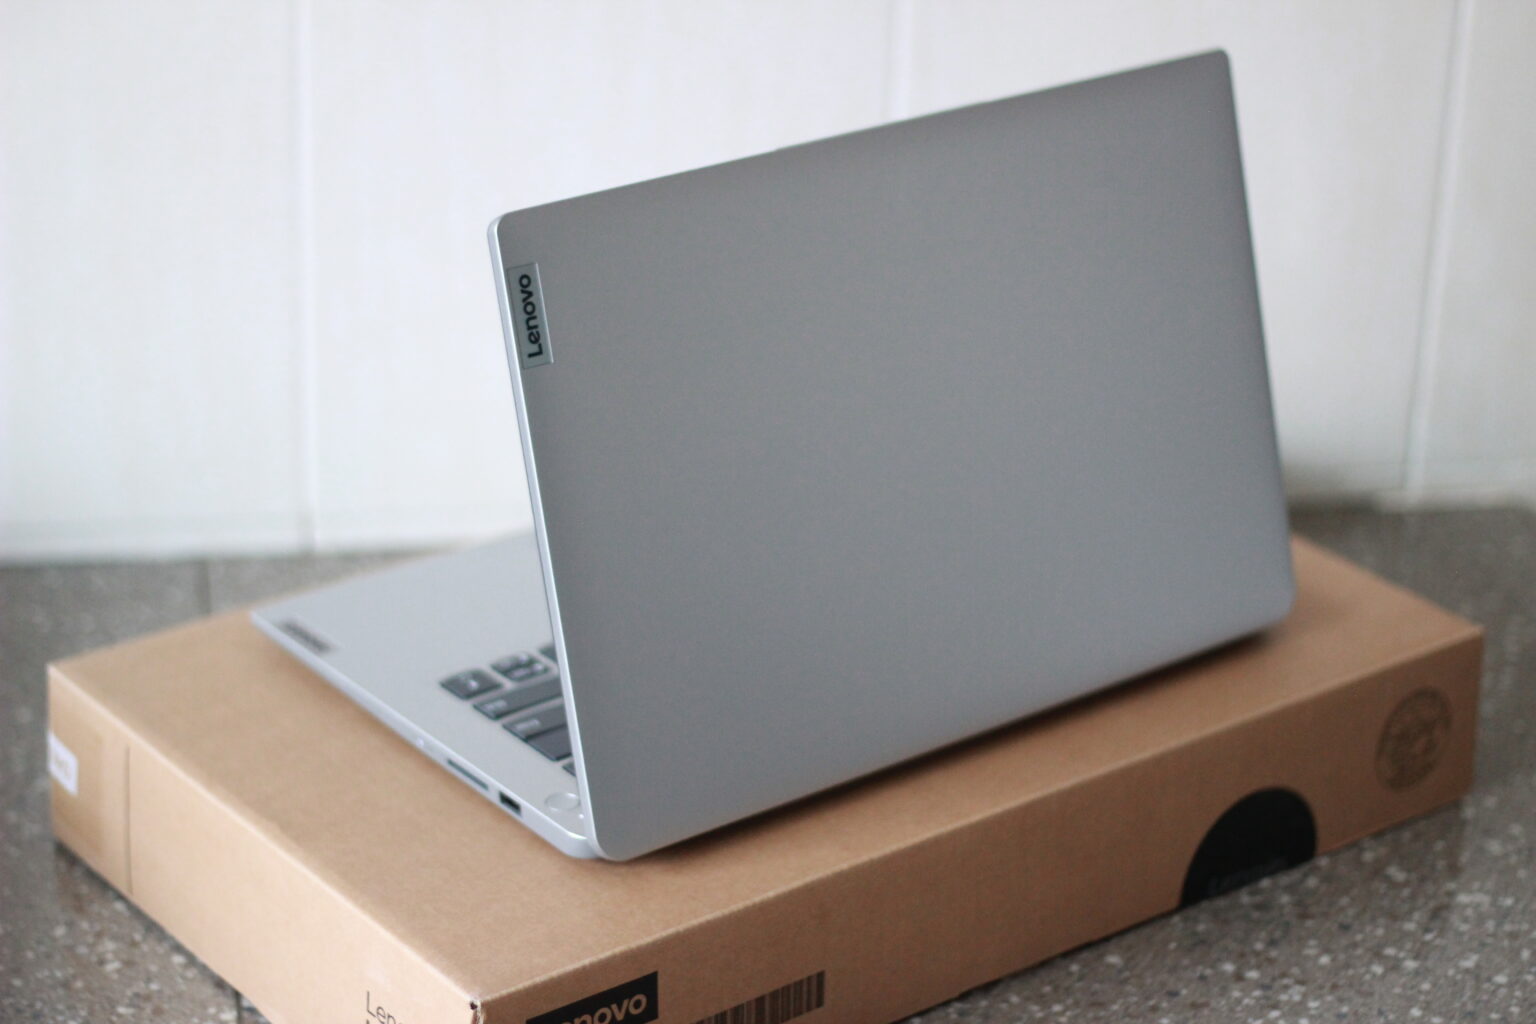 Lenovo IdeaPad 1 review: An entry-level laptop worth considering | TechNave